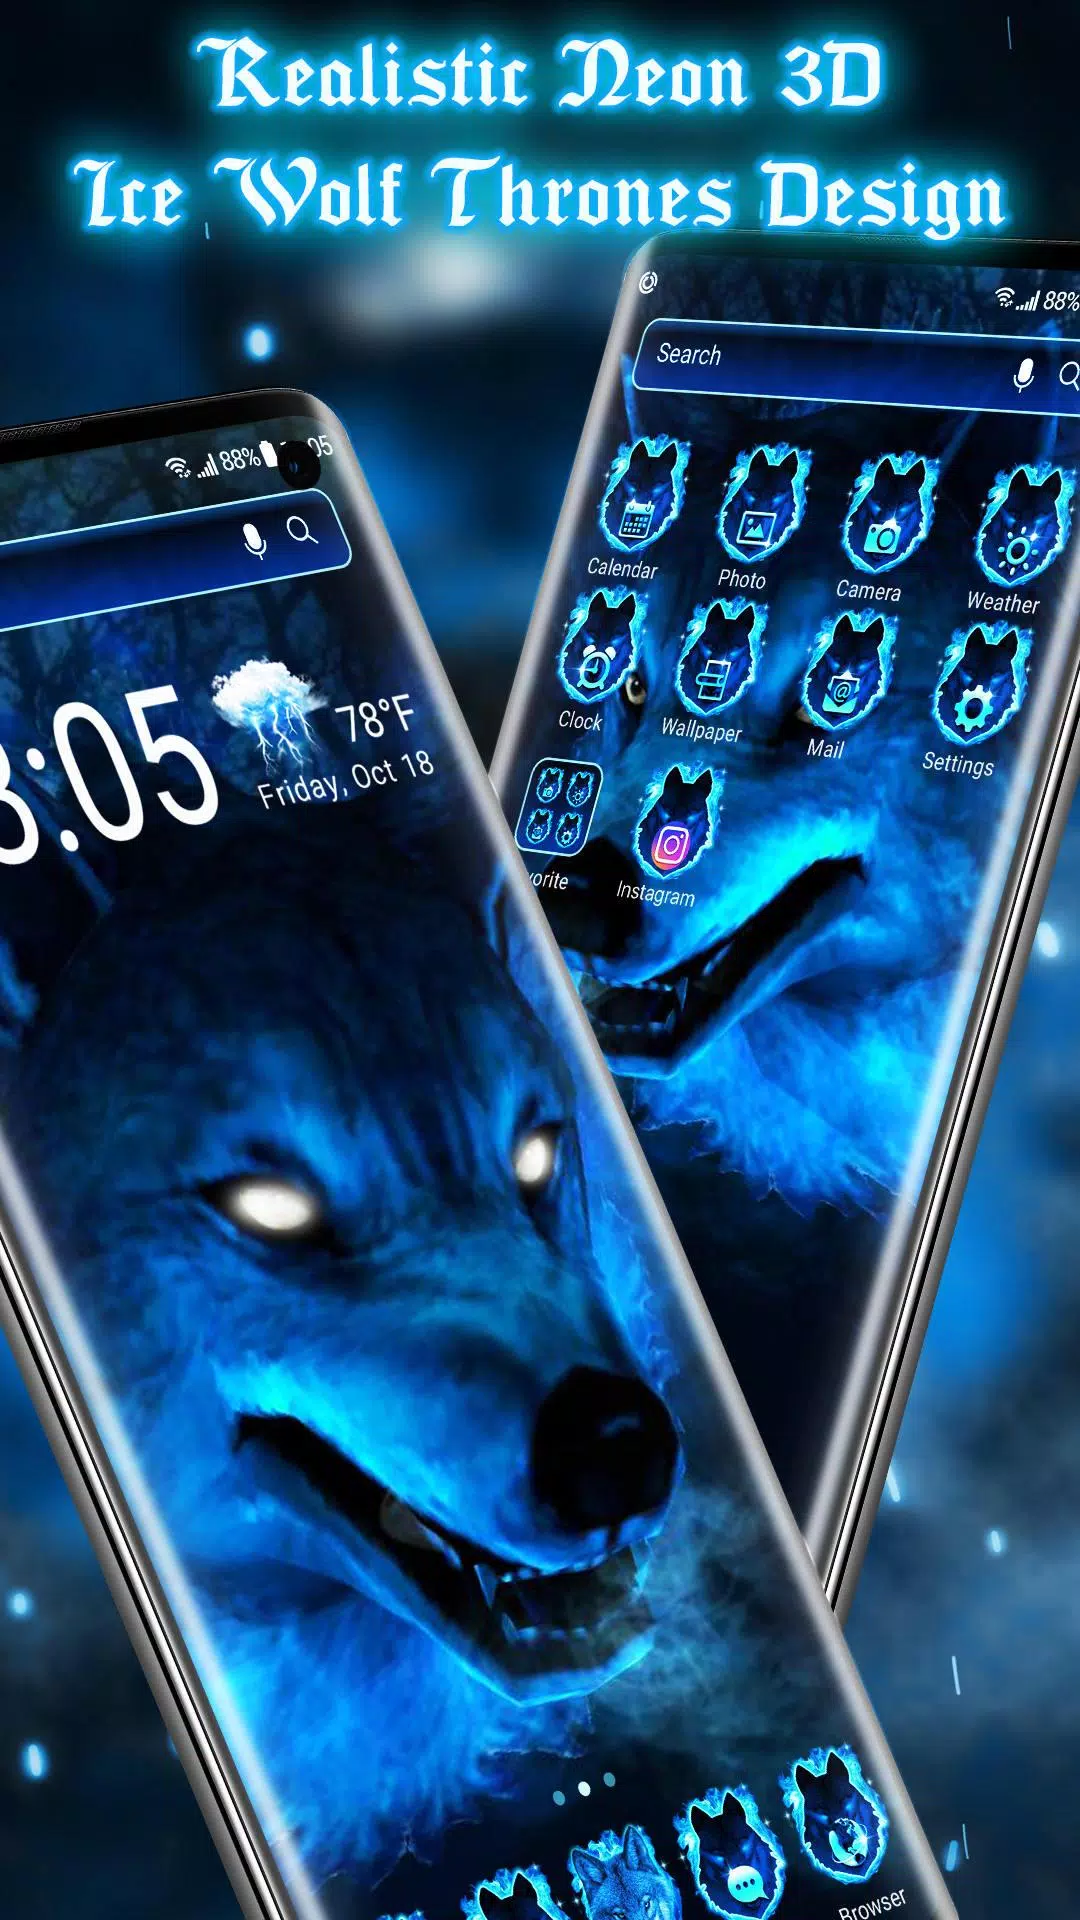 Ice Wolf Live Wallpaper HD APK for Android - Download